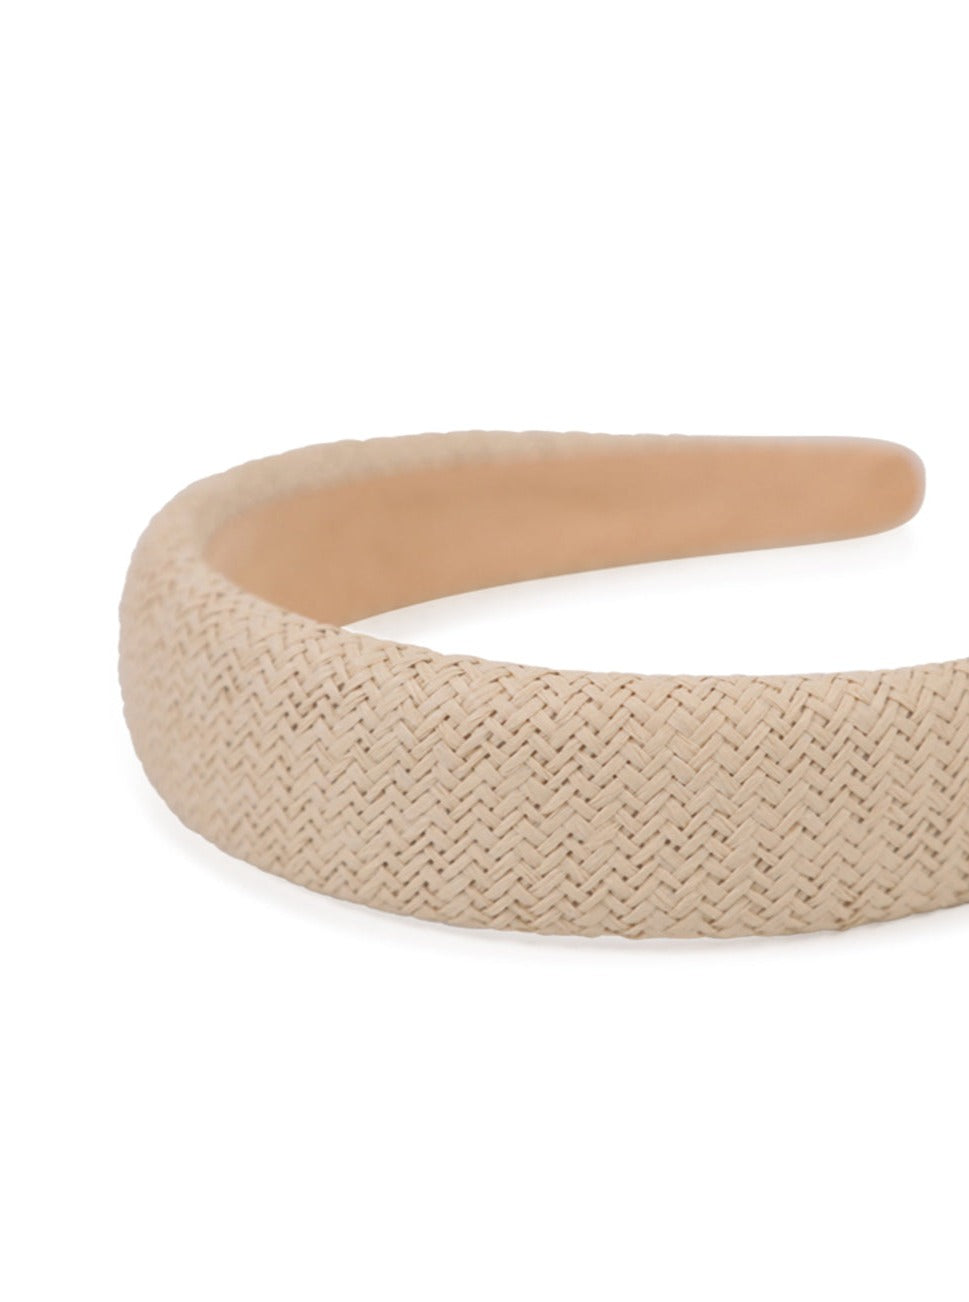 Woven Rounded Headband In Beige – My Accessories London